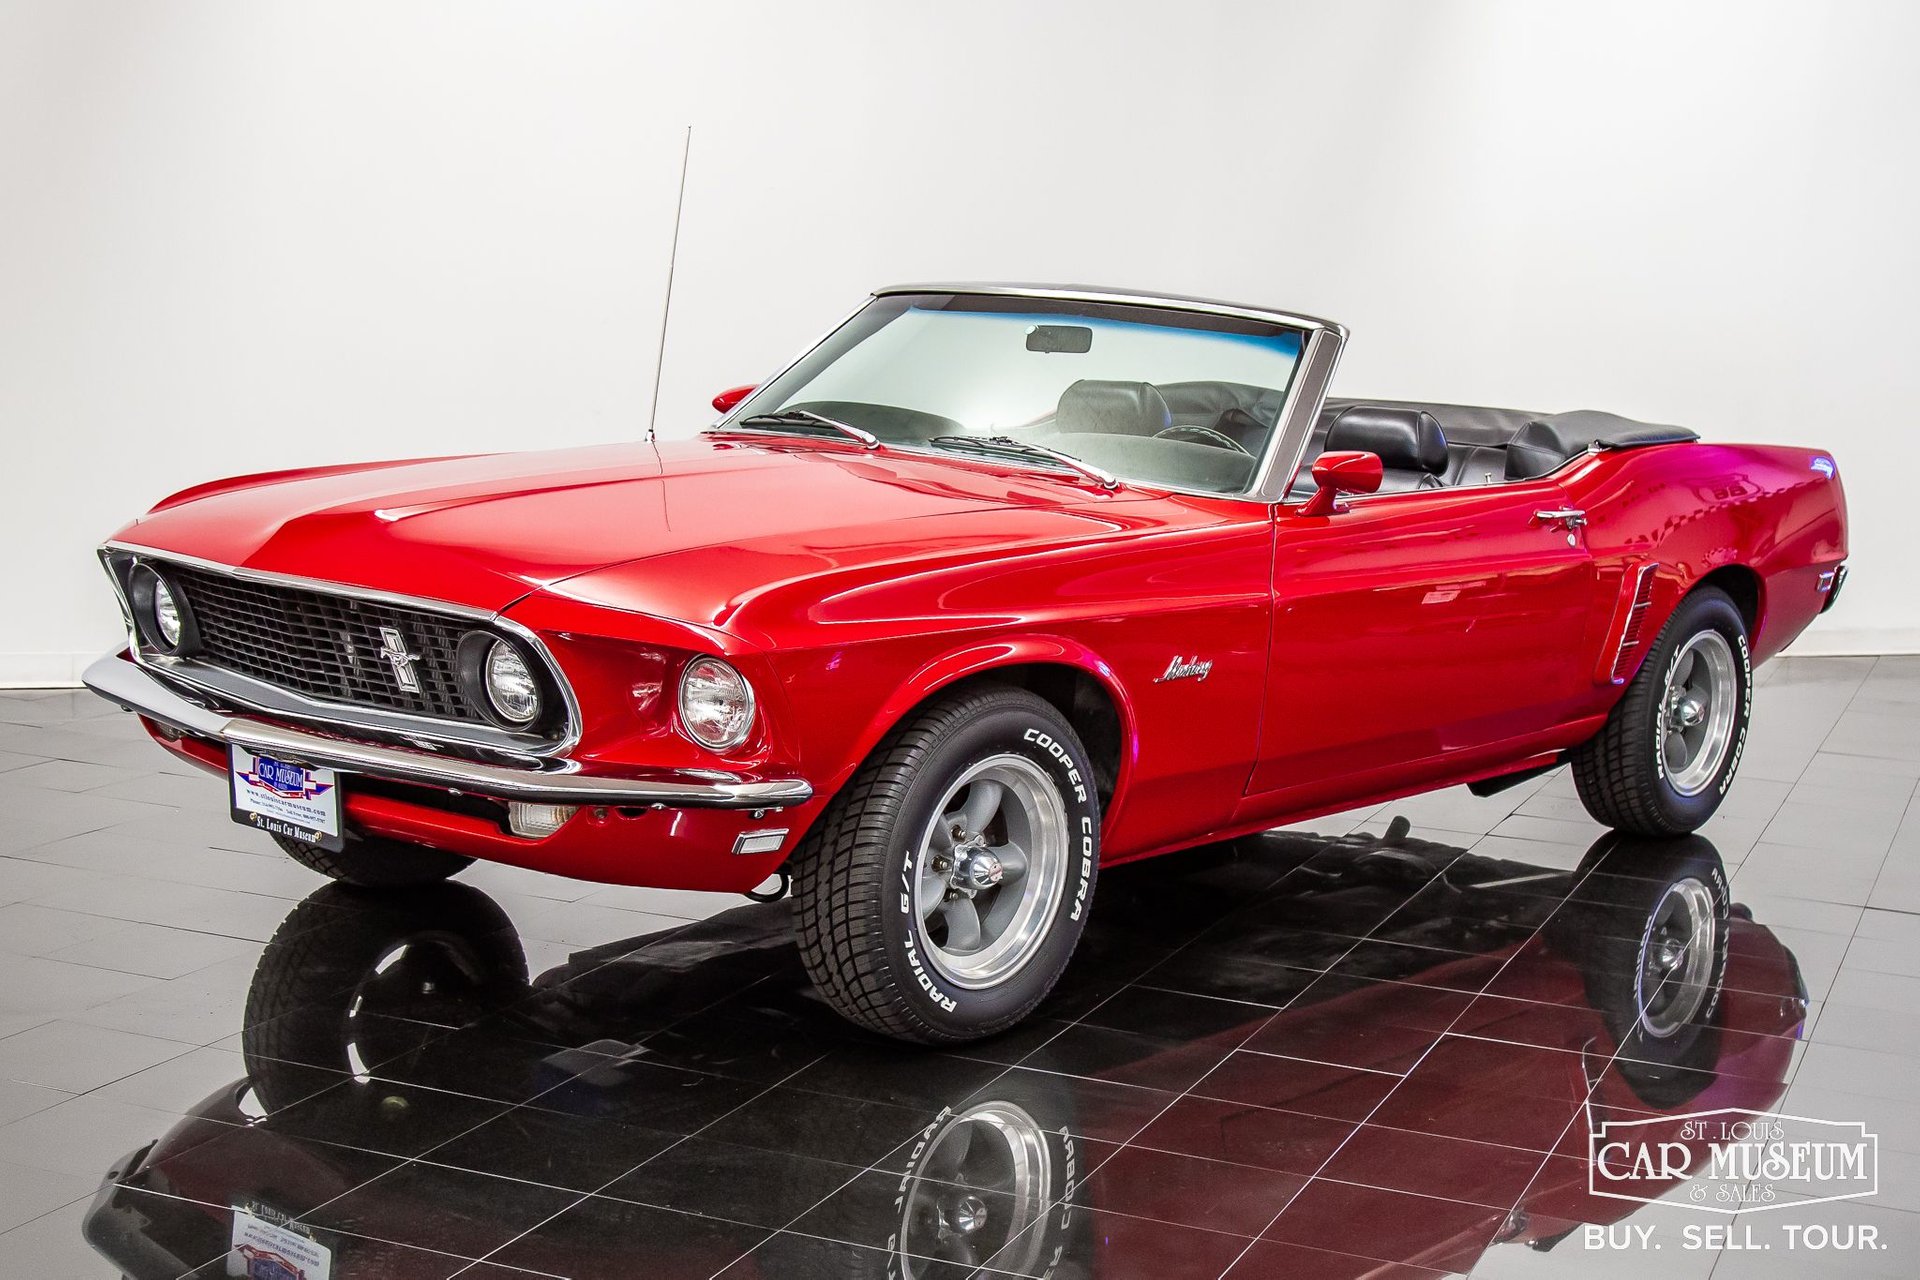 1969 Ford For Sale | St. Museum